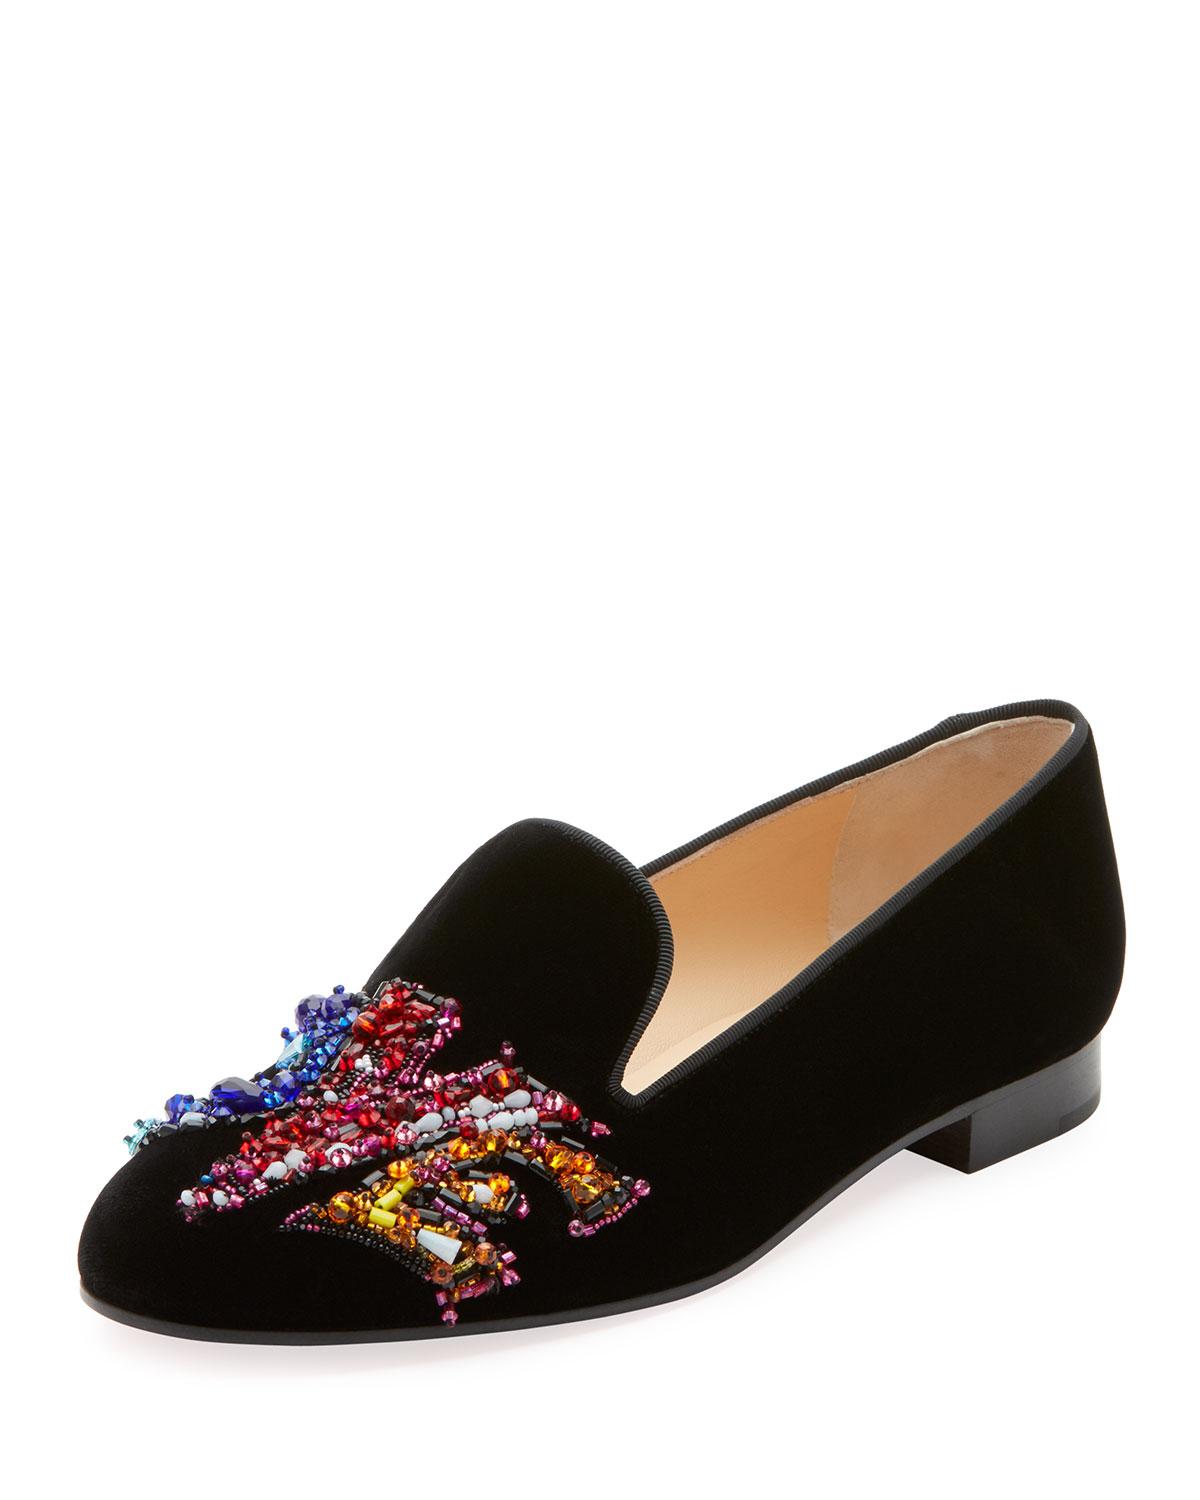 Christian Louboutin Solove Velvet Embellished Red Sole Loafers in Black - Lyst